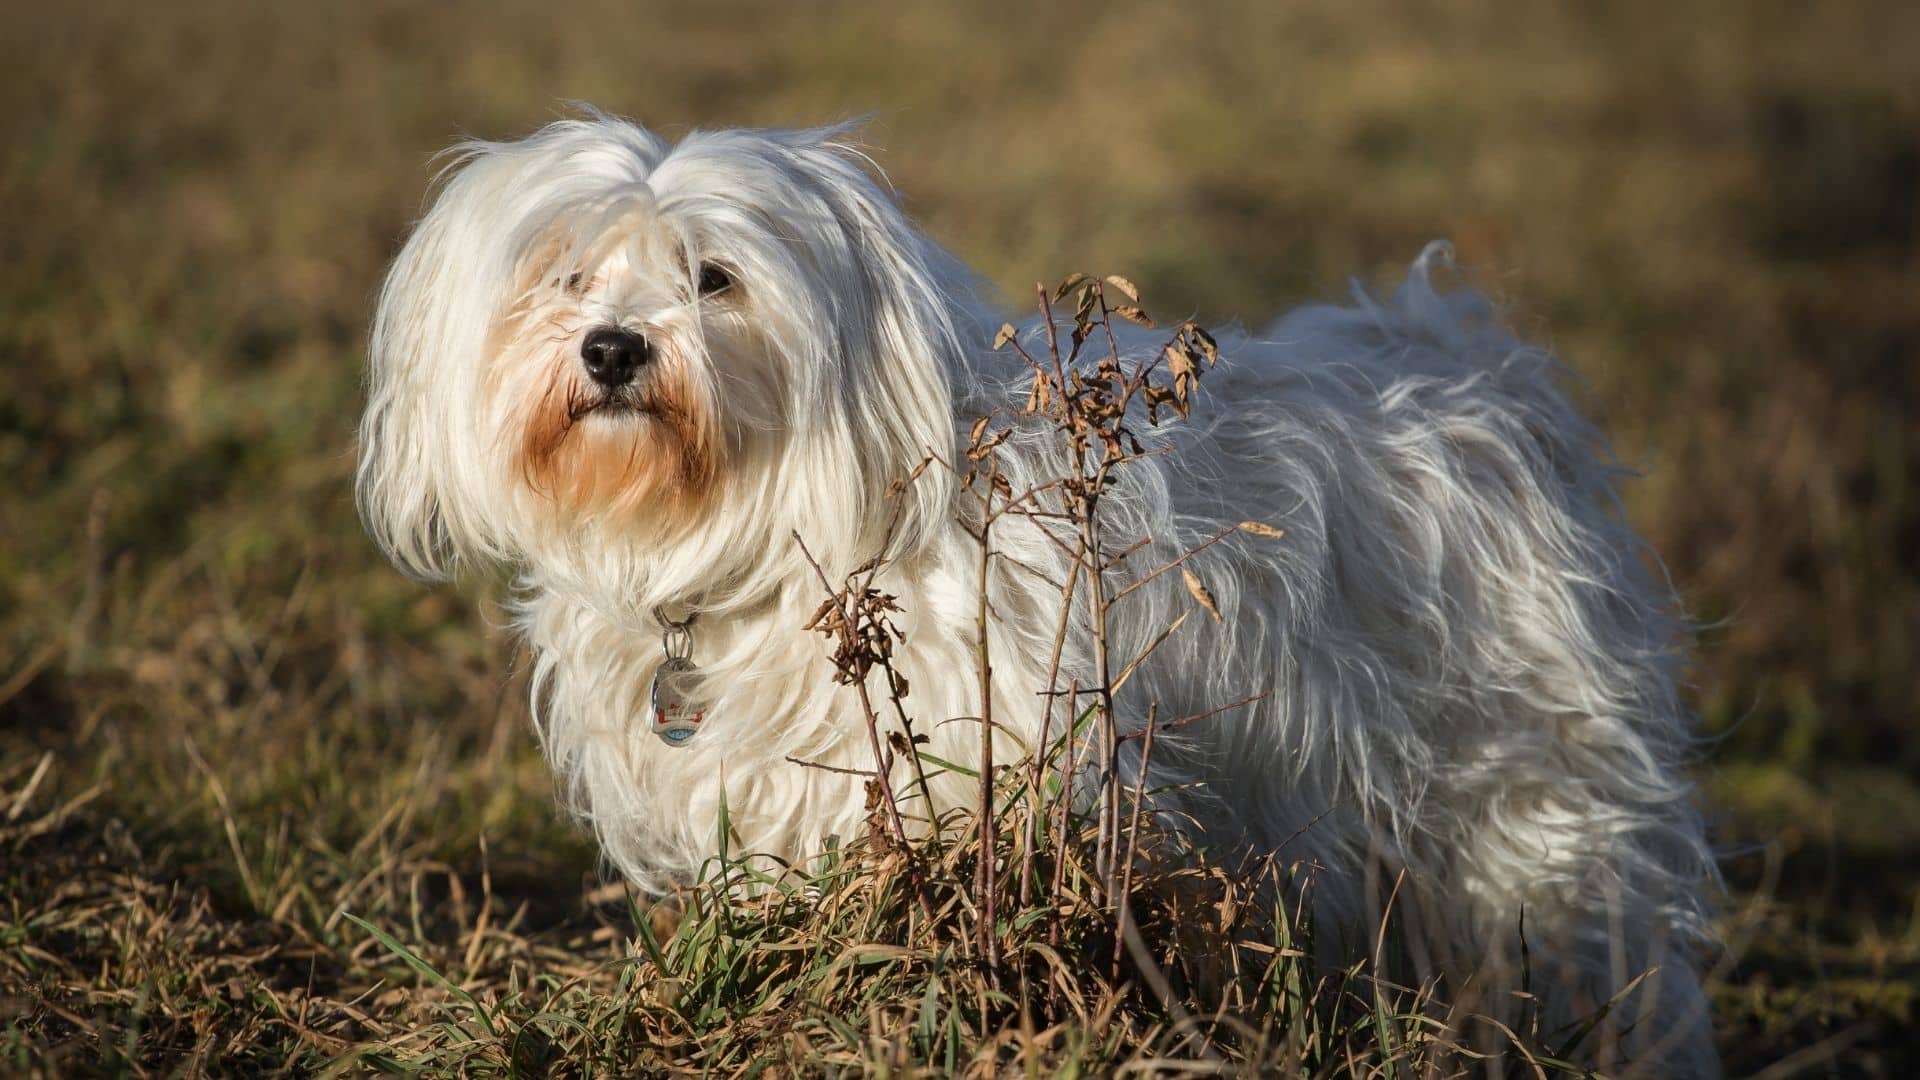 Havanese Dog Breed Guide: Facts, Health & Care